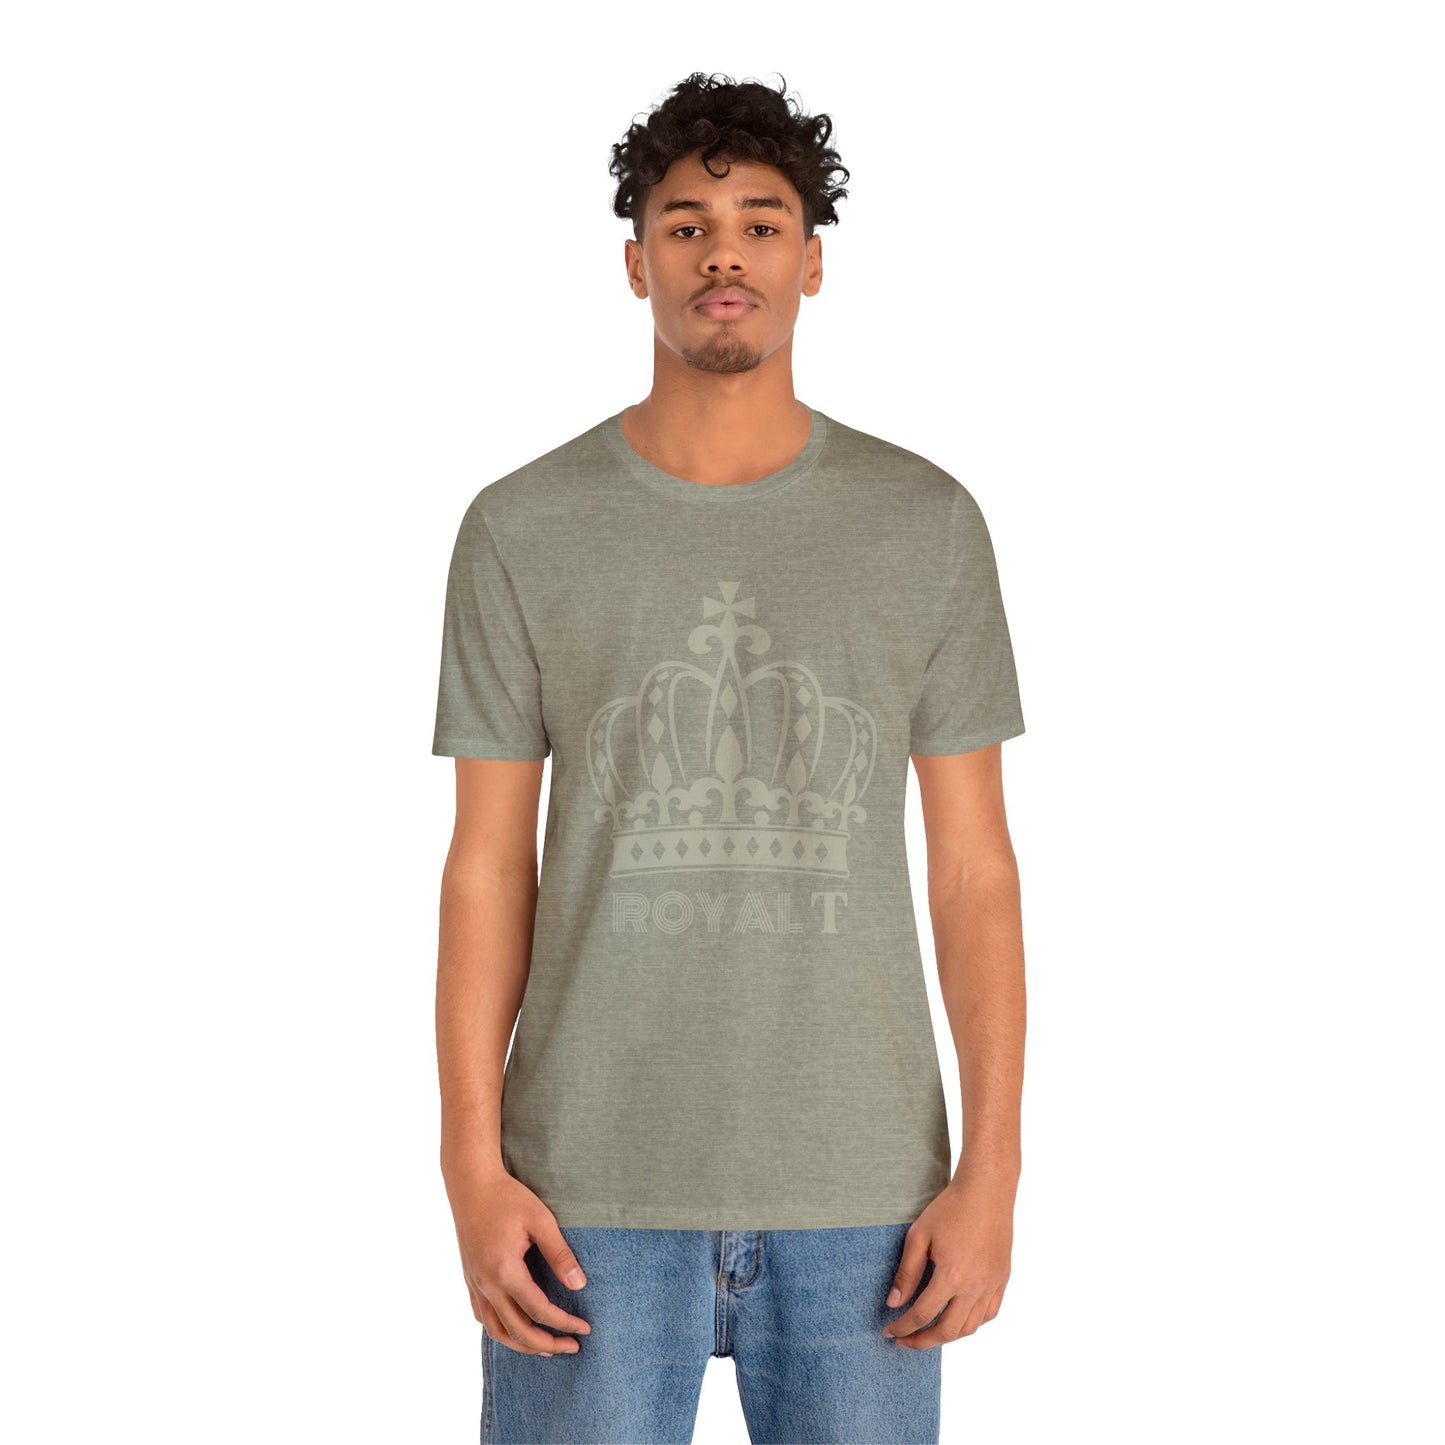 Heather Stone Brown - Unisex Jersey Short Sleeve T Shirt - Stone Brown Royal T